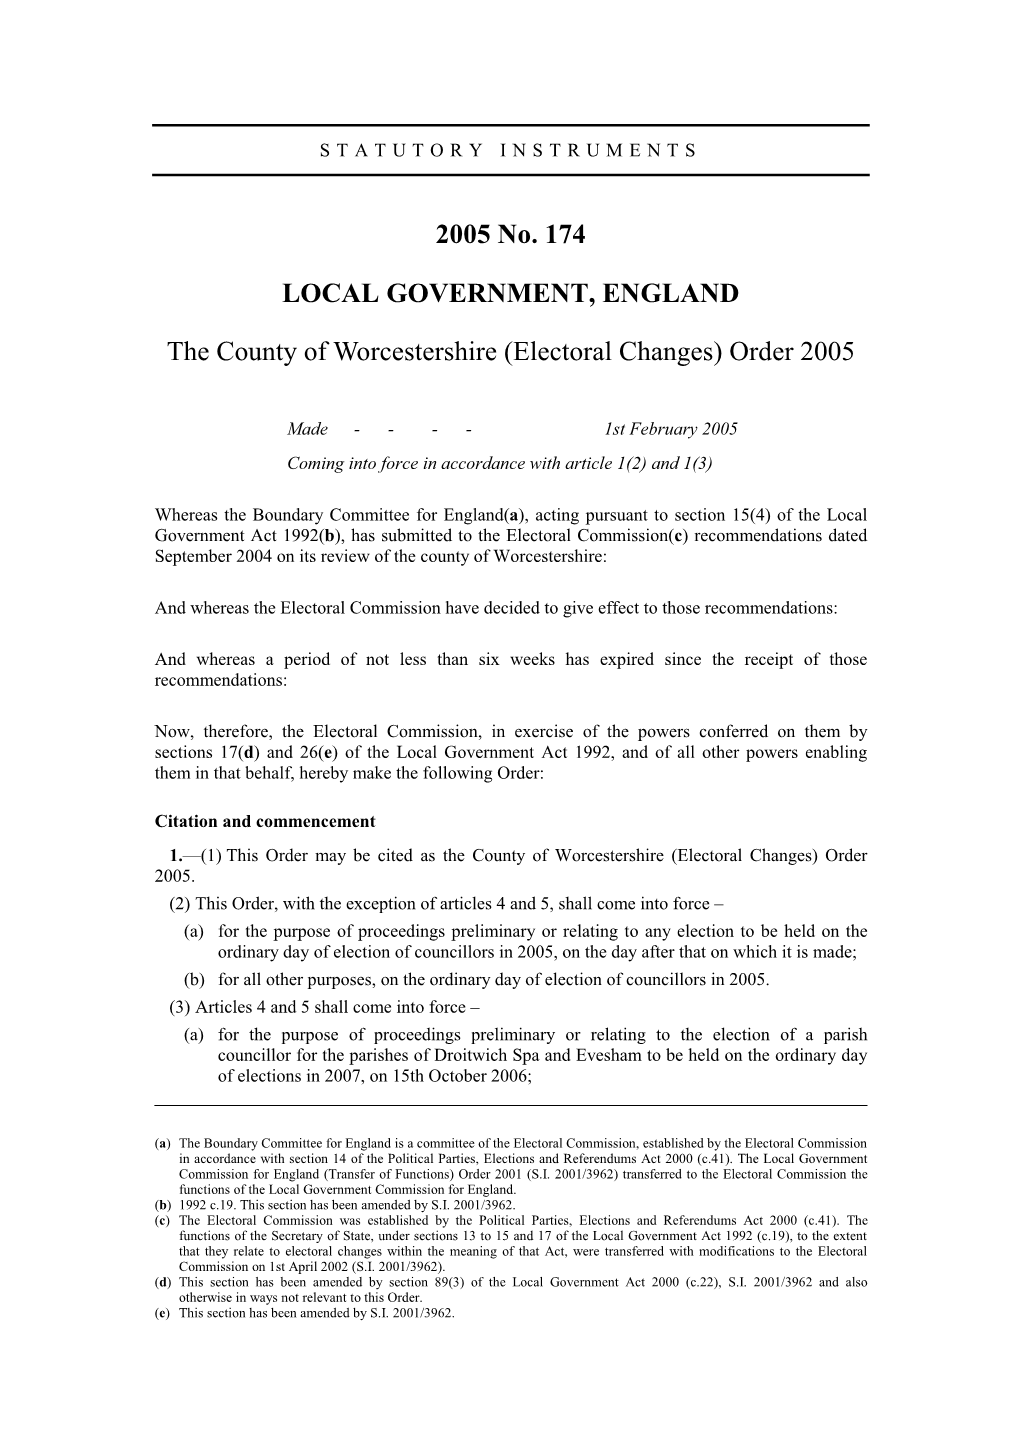 2005 No. 174 LOCAL GOVERNMENT, ENGLAND the County of Worcestershire (Electoral Changes) Order 2005